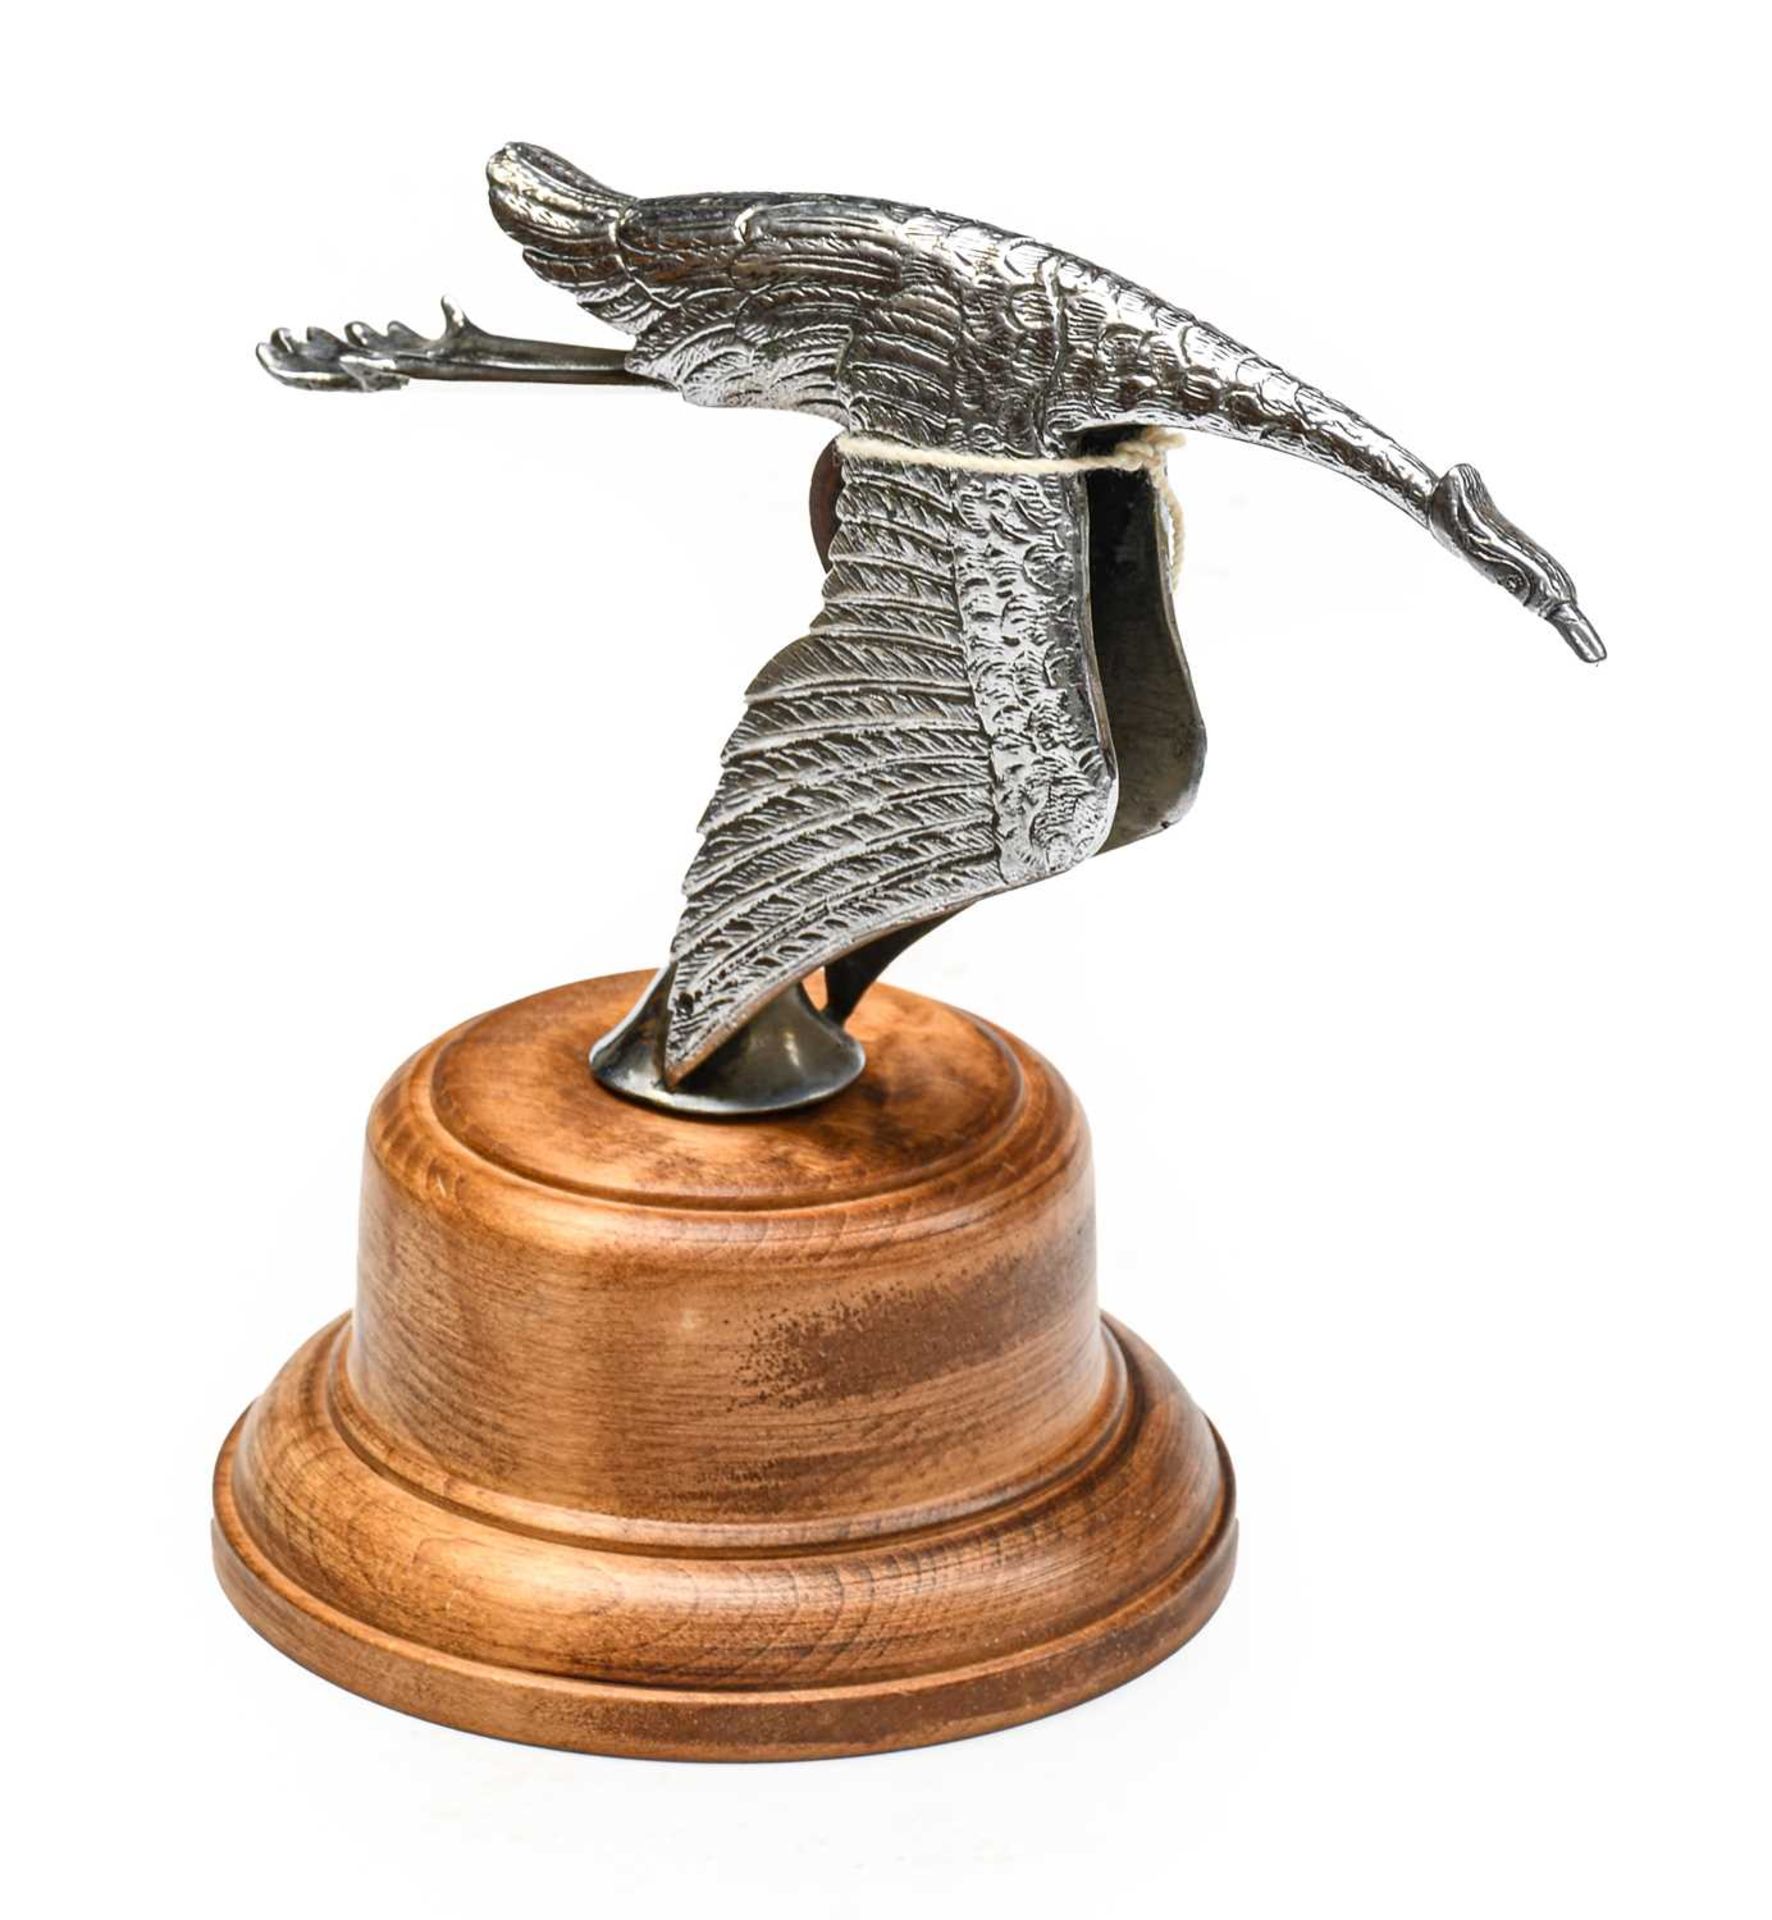 A 1920/30 Chromed Hispano Suiza Style Flying Stork Car Mascot, as a stylised bird with legs